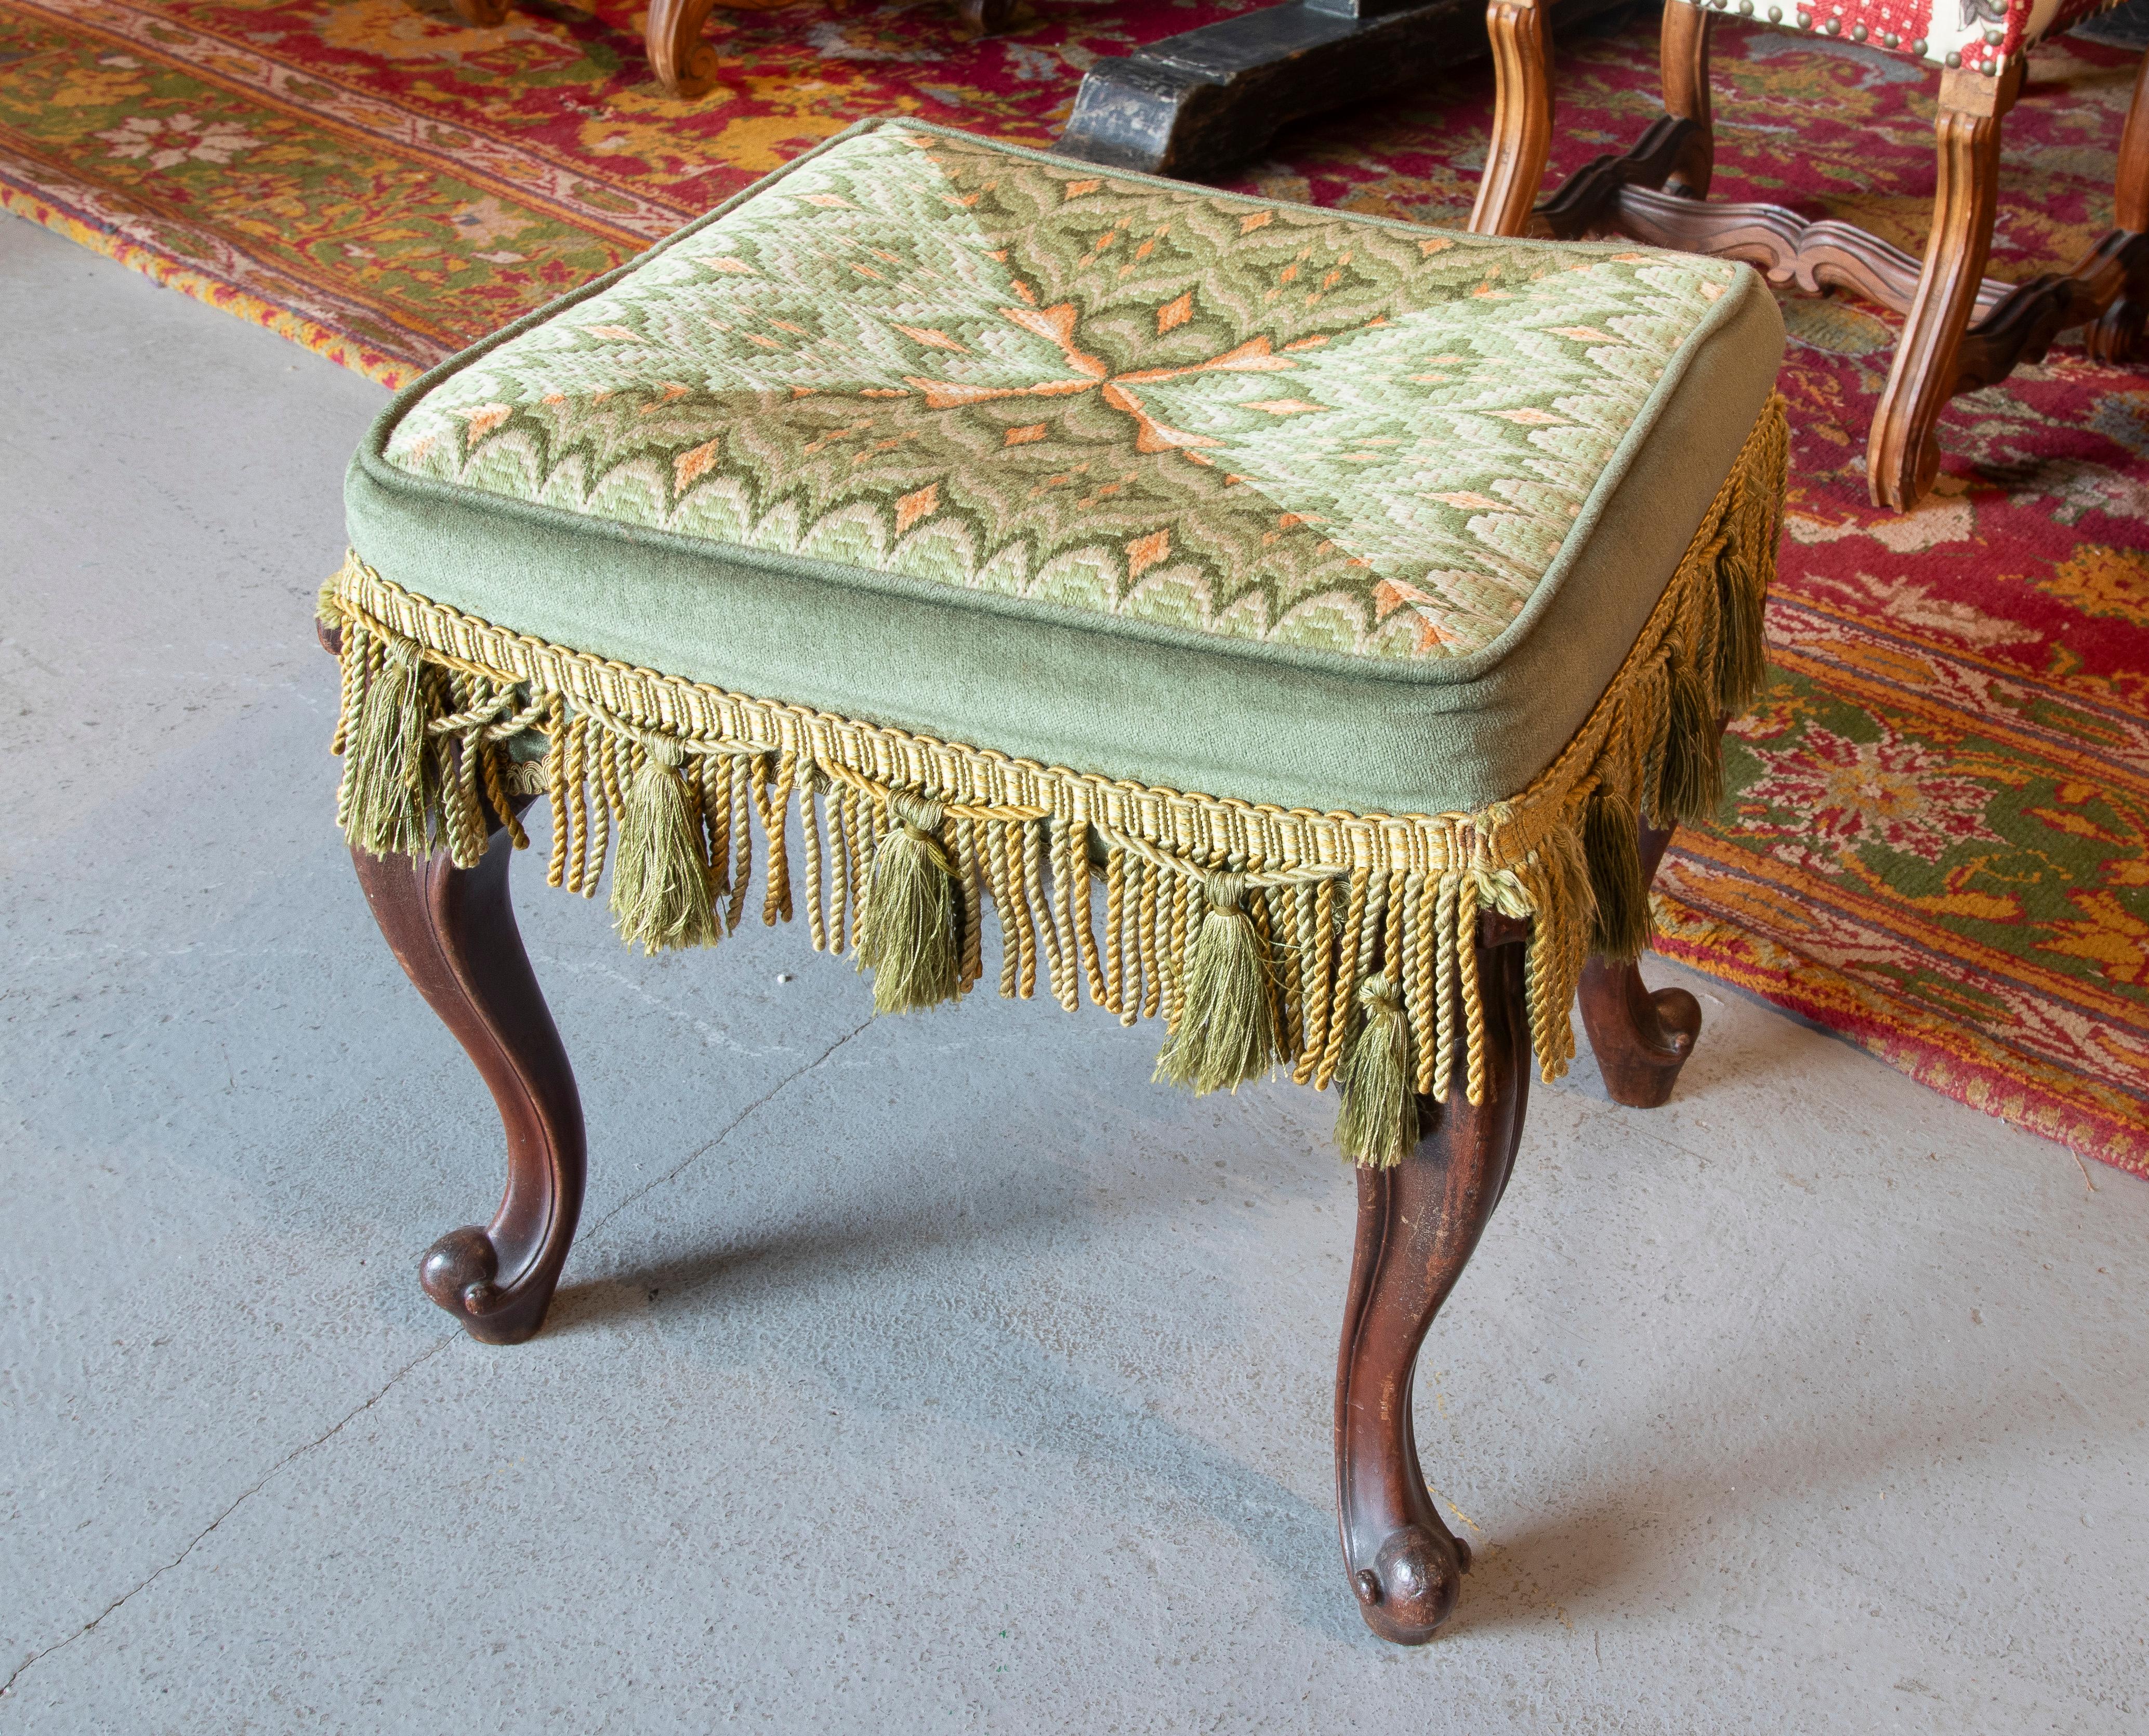 20th Century 19th Century English Mahogany Stool with Embroidered Seat  For Sale